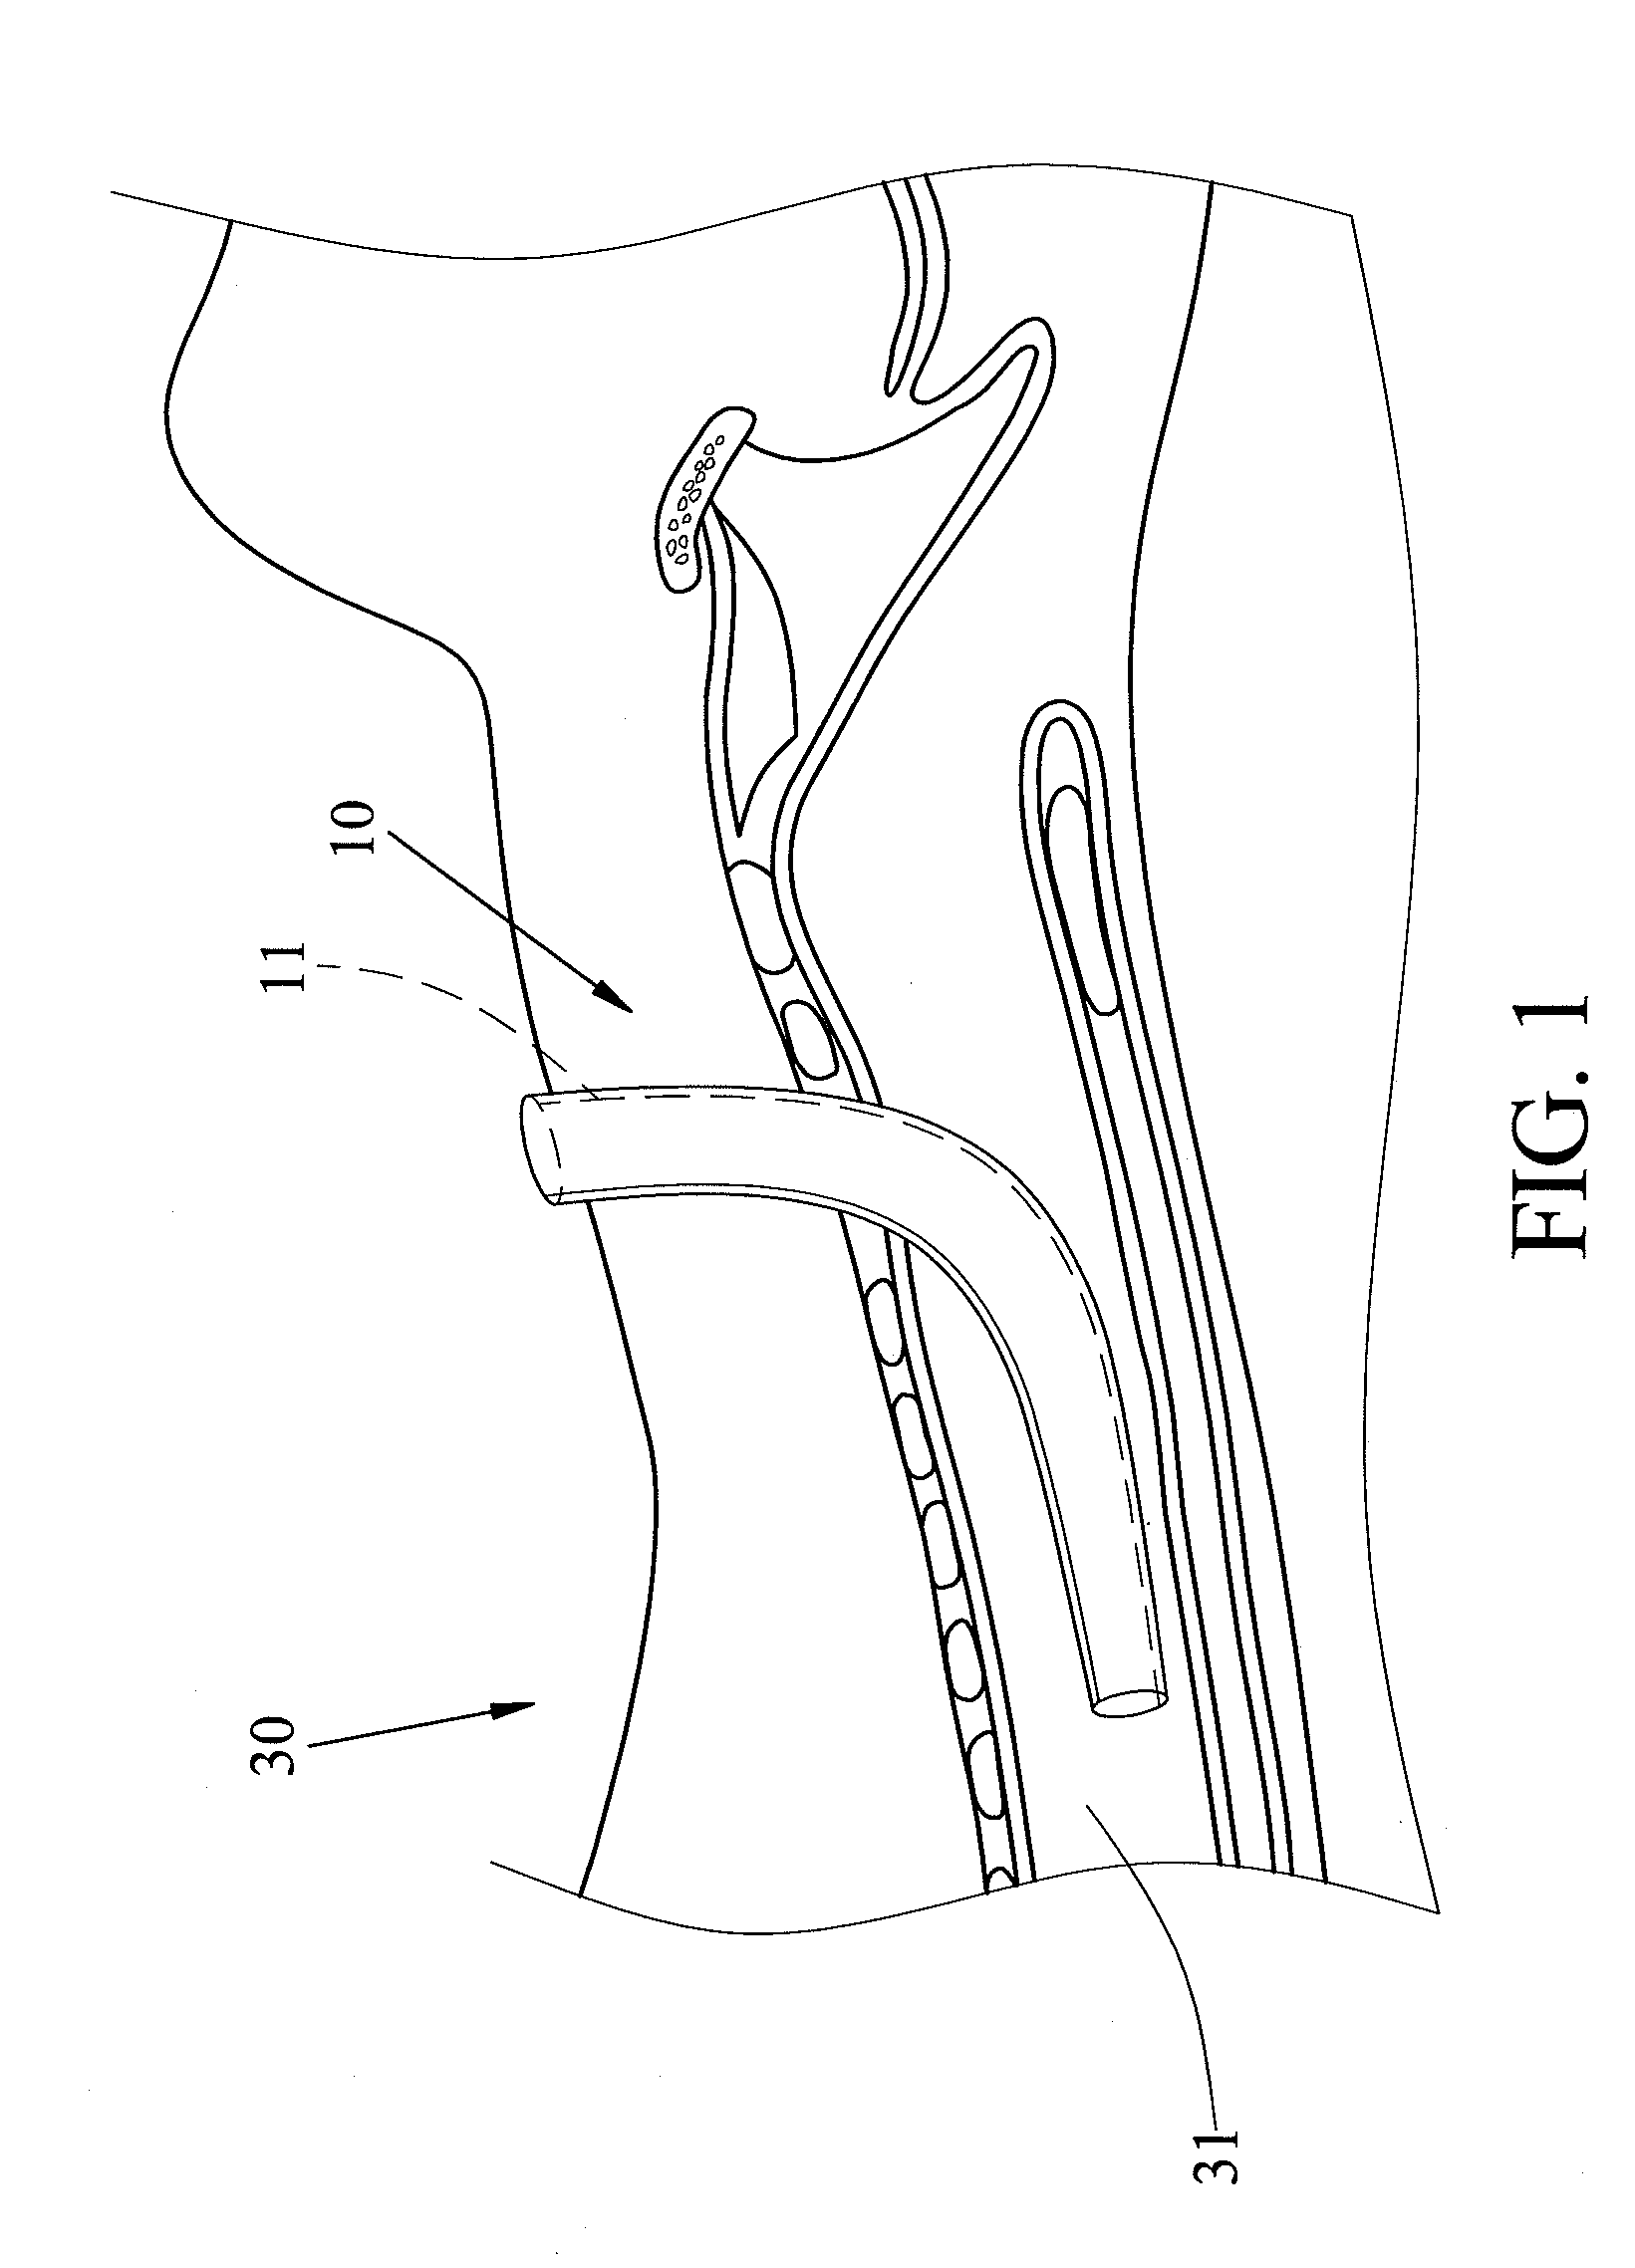 Device for Positioning Tracheostomy Tube